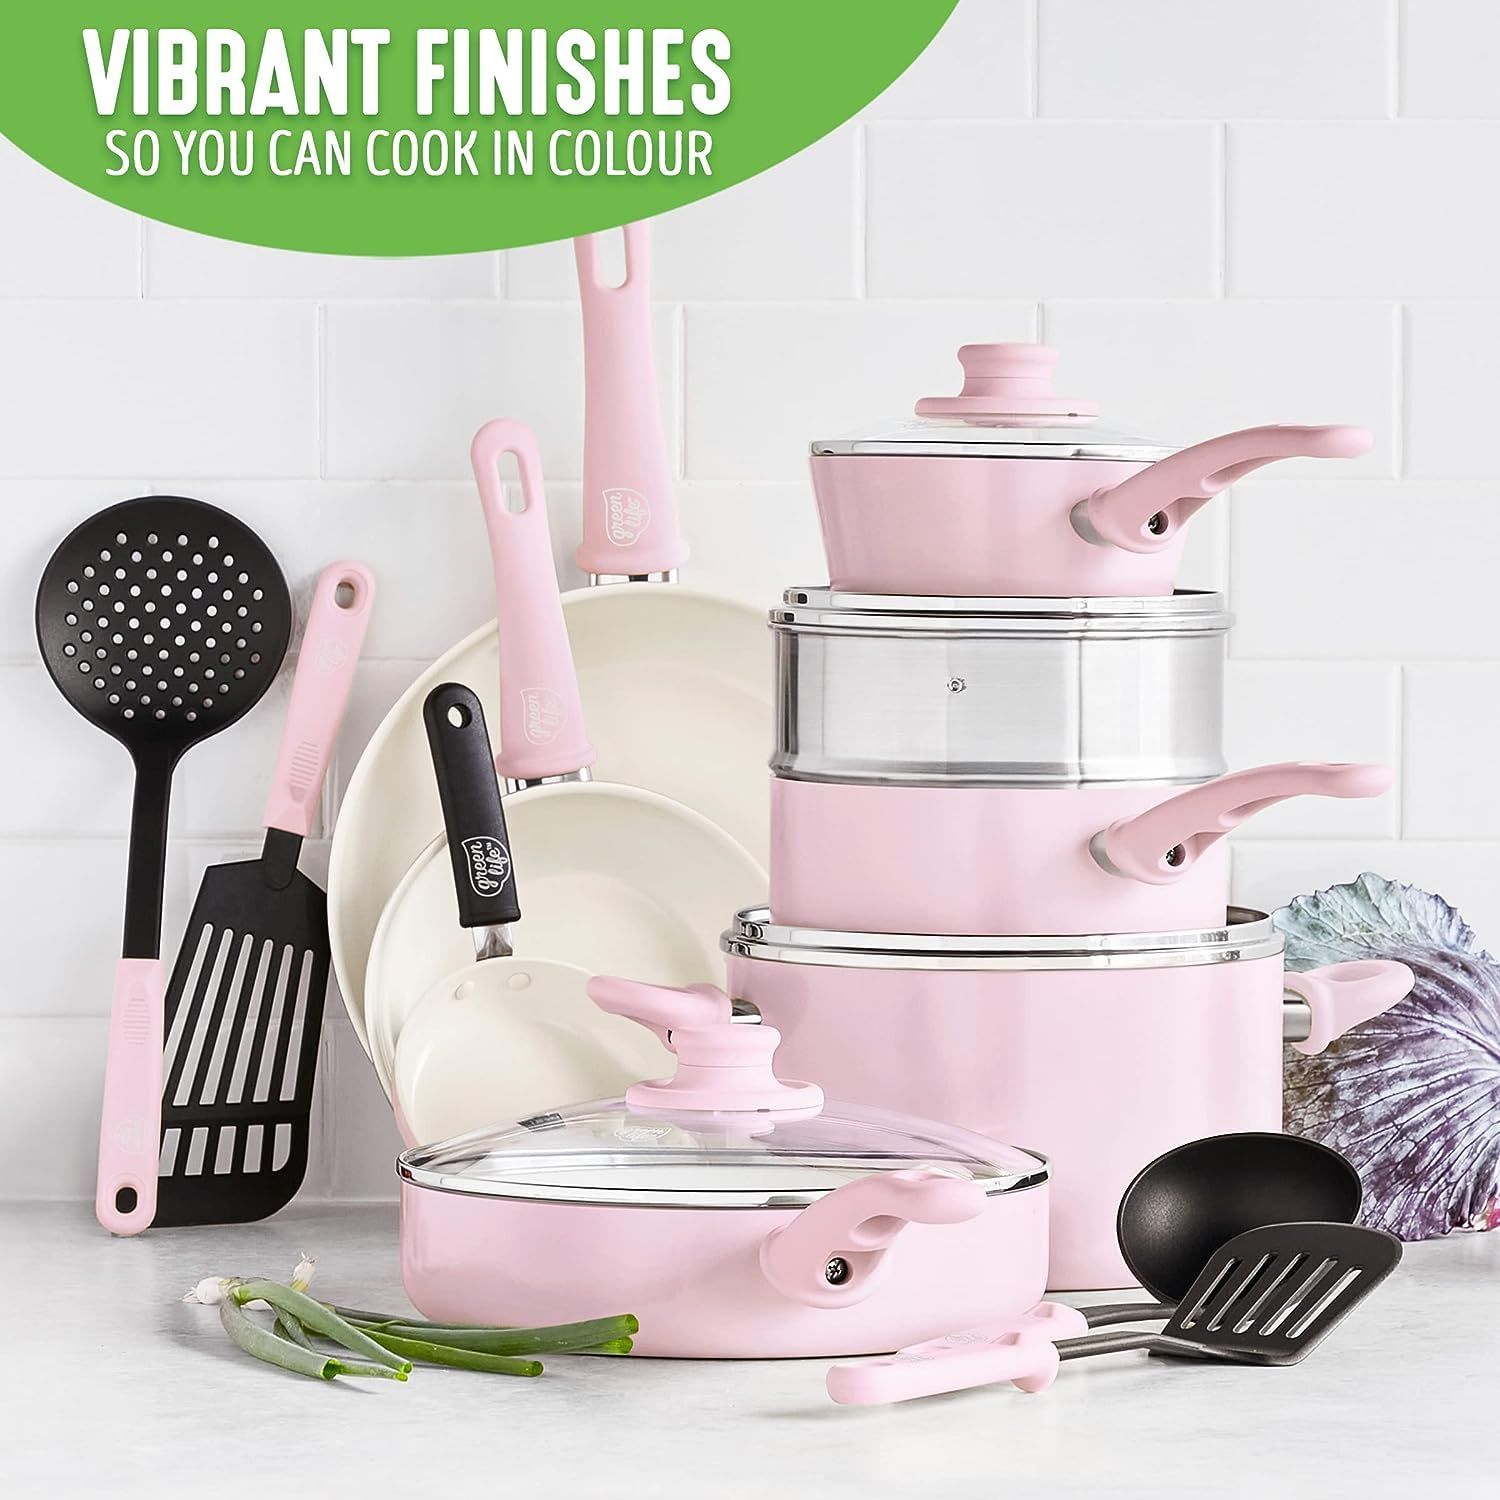 GreenLife Soft Grip Healthy Ceramic Nonstick 16 Piece Kitchen Cookware Pots and Frying Sauce Pans Set, PFAS-Free, Dishwasher Safe, Soft Pink